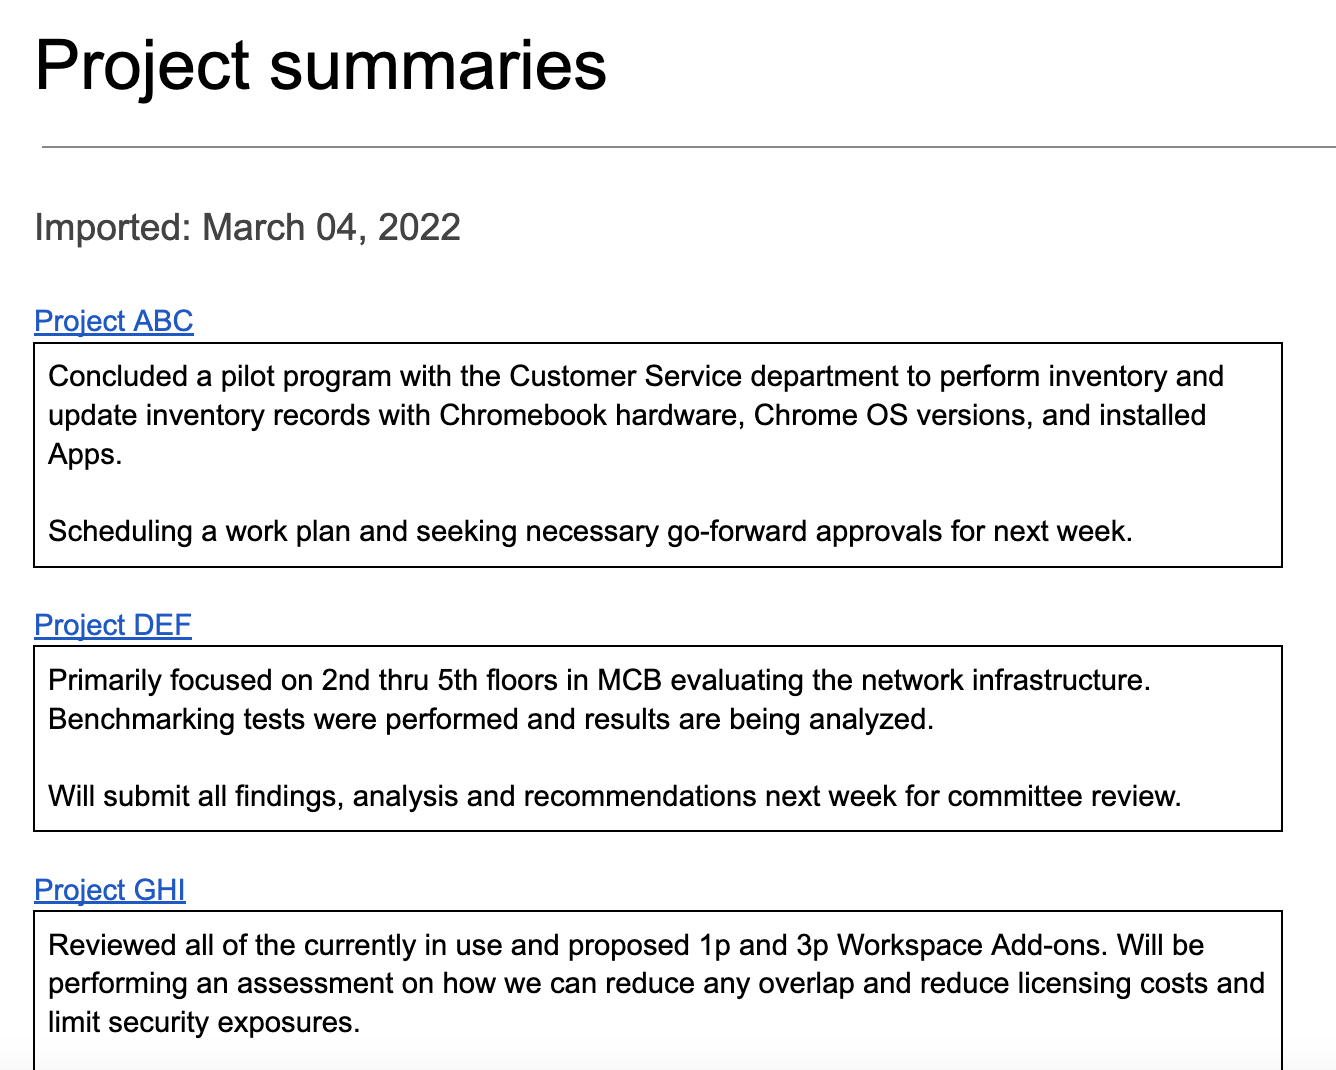 Screenshot of imported project summaries